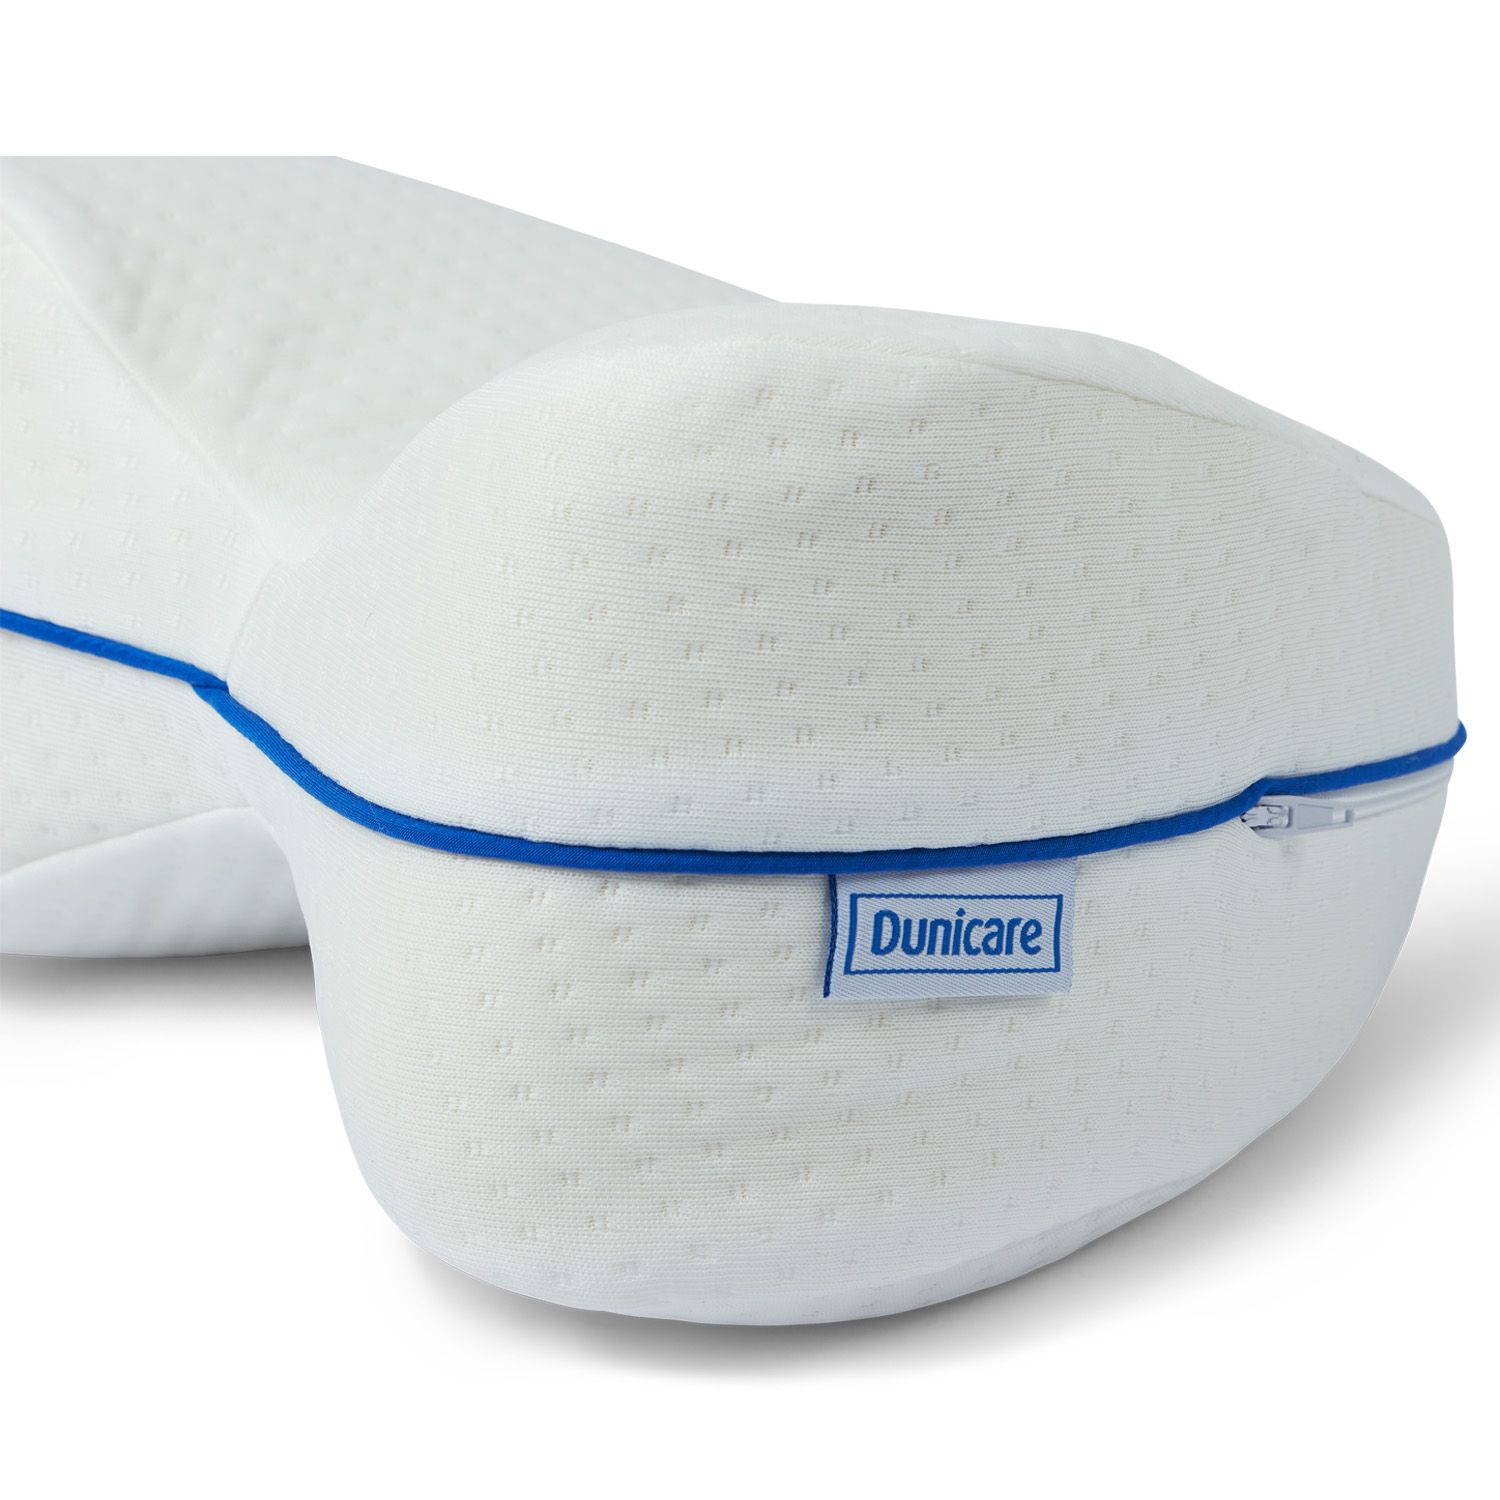 dunimed dunicare leg pillow pictured from the back